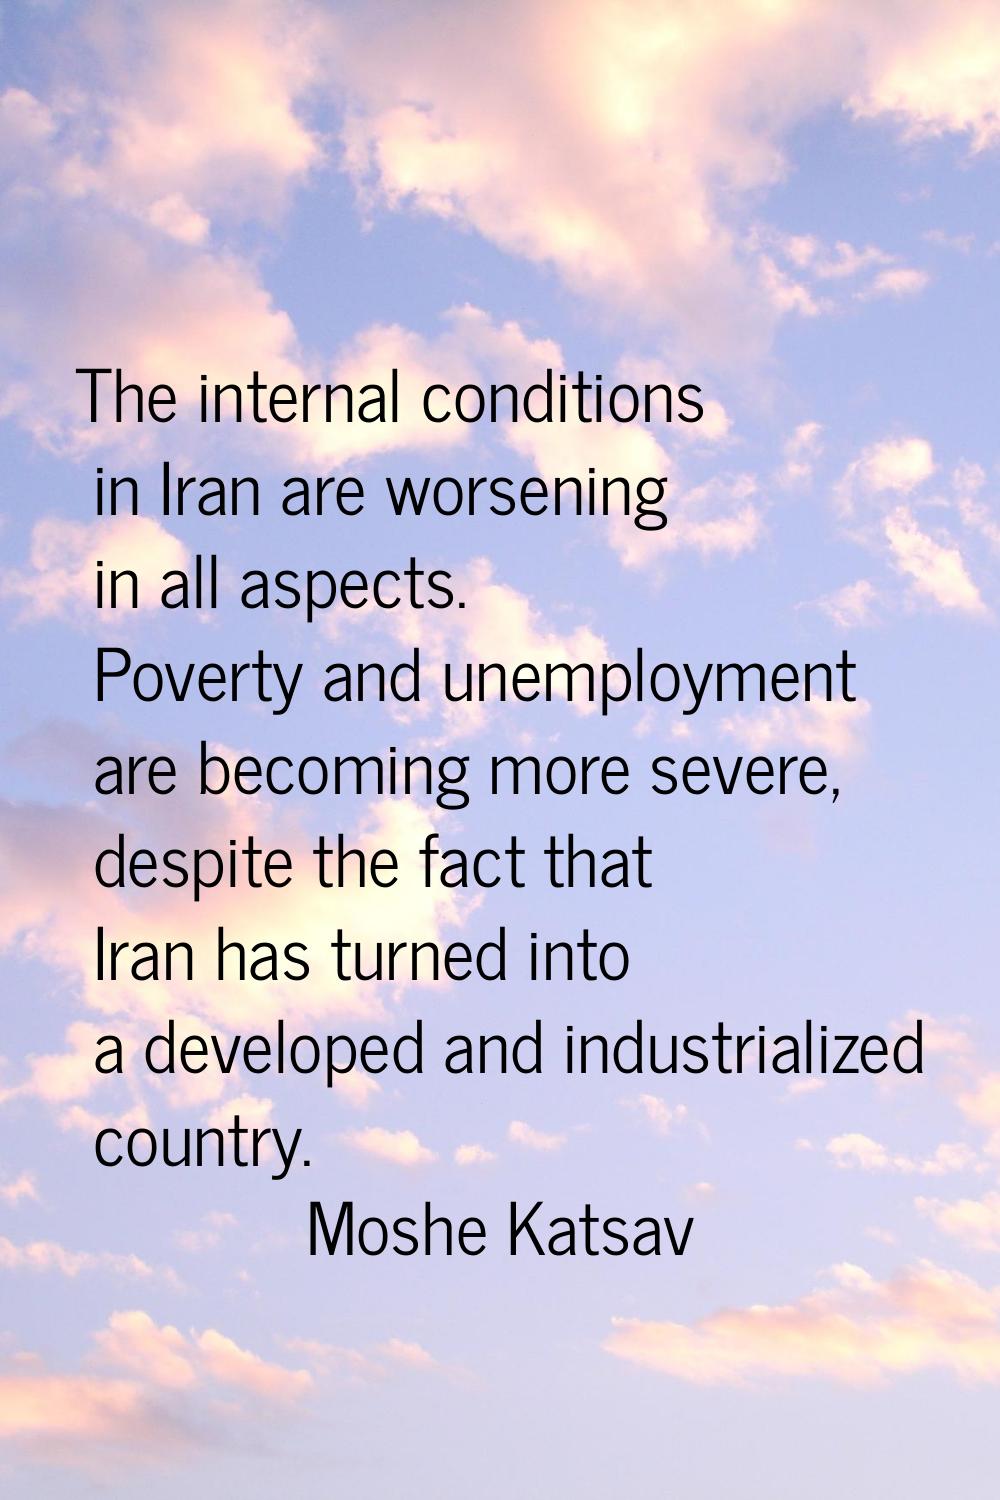 The internal conditions in Iran are worsening in all aspects. Poverty and unemployment are becoming